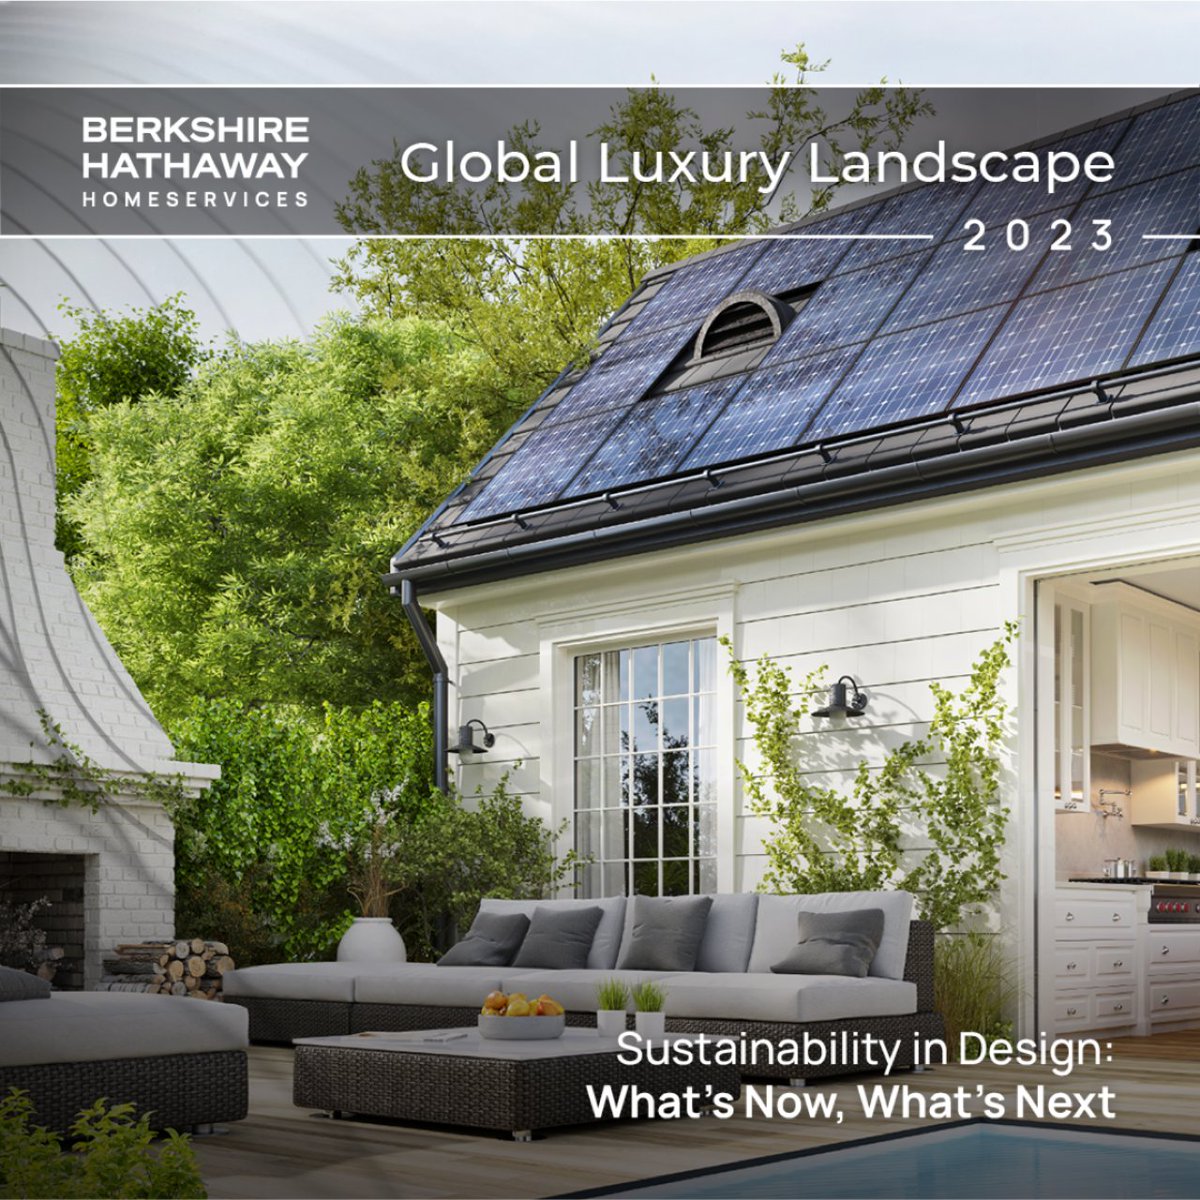 Today, sustainability in design is here to stay, not just a trend. Read now at bhhsluxury.com #BHHS #BHHSRealEstate #RealEstateReport #SustainabilityinDesign #HomeDesign #Sustainability